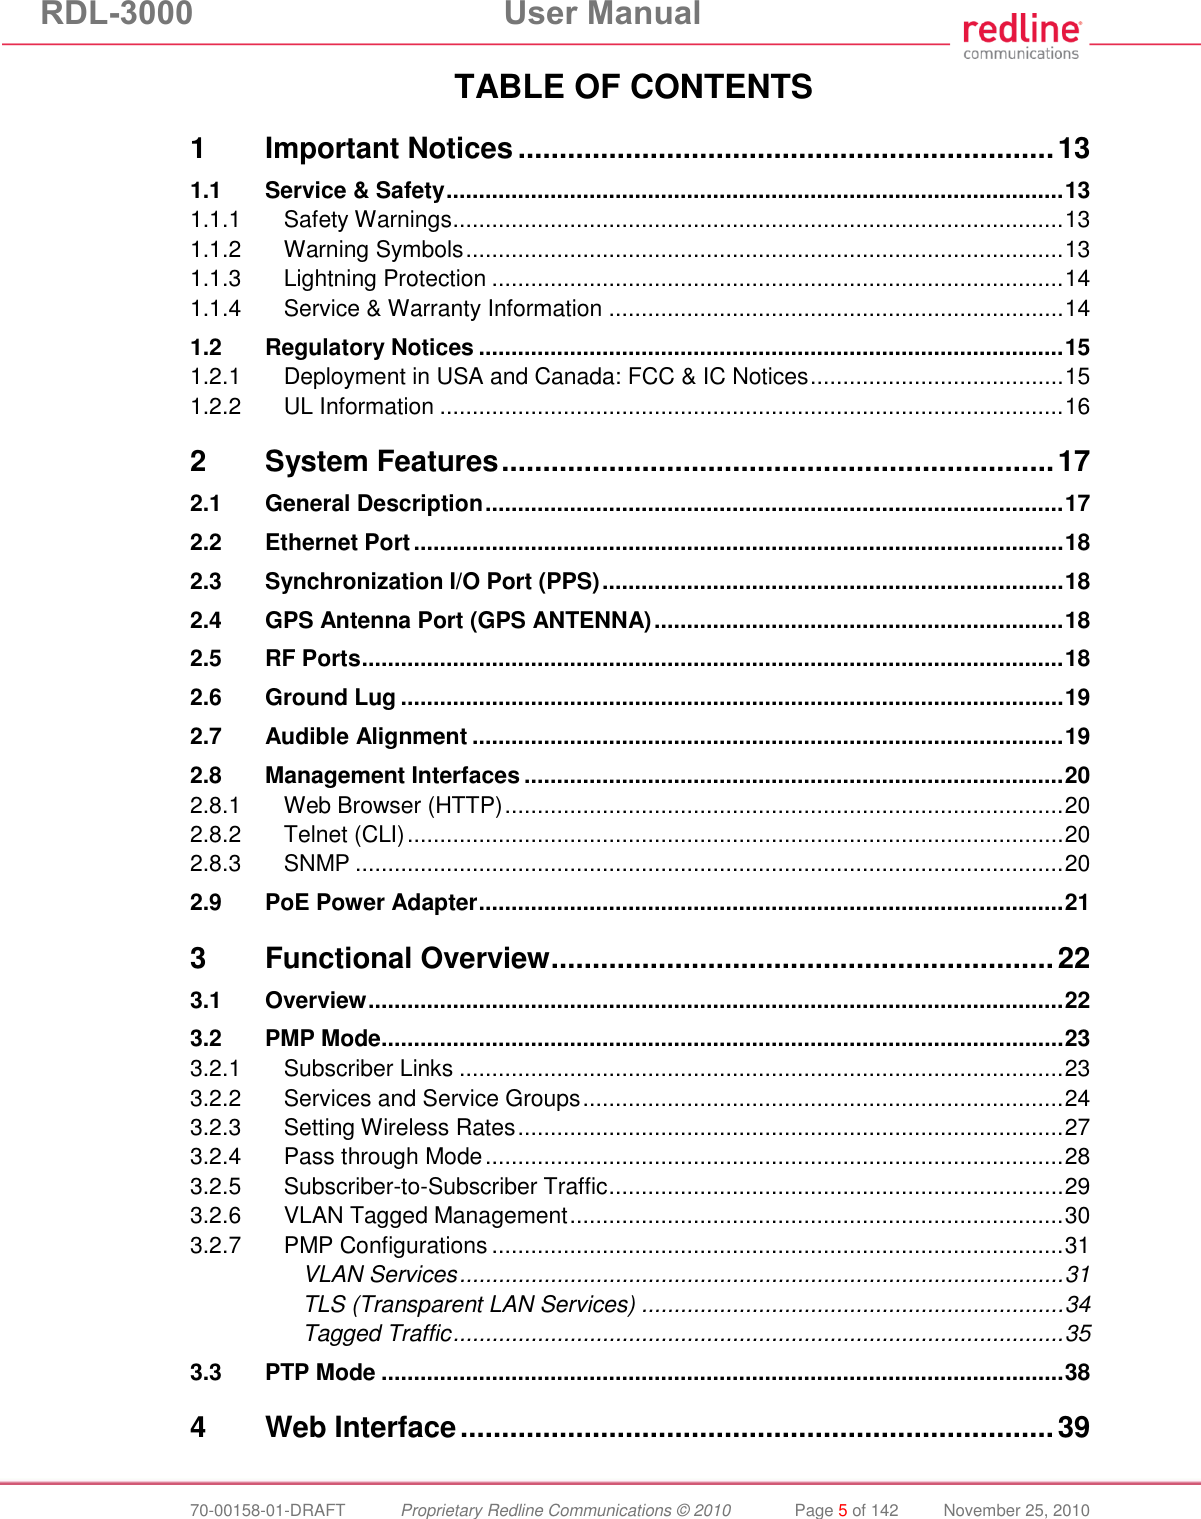 RDL-3000  User Manual  70-00158-01-DRAFT  Proprietary Redline Communications © 2010  Page 5 of 142  November 25, 2010 TABLE OF CONTENTS 1 Important Notices ................................................................. 13 1.1 Service &amp; Safety ............................................................................................... 13 1.1.1 Safety Warnings .............................................................................................. 13 1.1.2 Warning Symbols ............................................................................................ 13 1.1.3 Lightning Protection ........................................................................................ 14 1.1.4 Service &amp; Warranty Information ...................................................................... 14 1.2 Regulatory Notices .......................................................................................... 15 1.2.1 Deployment in USA and Canada: FCC &amp; IC Notices ....................................... 15 1.2.2 UL Information ................................................................................................ 16 2 System Features ................................................................... 17 2.1 General Description ......................................................................................... 17 2.2 Ethernet Port .................................................................................................... 18 2.3 Synchronization I/O Port (PPS) ....................................................................... 18 2.4 GPS Antenna Port (GPS ANTENNA) ............................................................... 18 2.5 RF Ports ............................................................................................................ 18 2.6 Ground Lug ...................................................................................................... 19 2.7 Audible Alignment ........................................................................................... 19 2.8 Management Interfaces ................................................................................... 20 2.8.1 Web Browser (HTTP) ...................................................................................... 20 2.8.2 Telnet (CLI) ..................................................................................................... 20 2.8.3 SNMP ............................................................................................................. 20 2.9 PoE Power Adapter .......................................................................................... 21 3 Functional Overview ............................................................. 22 3.1 Overview ........................................................................................................... 22 3.2 PMP Mode ......................................................................................................... 23 3.2.1 Subscriber Links ............................................................................................. 23 3.2.2 Services and Service Groups .......................................................................... 24 3.2.3 Setting Wireless Rates .................................................................................... 27 3.2.4 Pass through Mode ......................................................................................... 28 3.2.5 Subscriber-to-Subscriber Traffic ...................................................................... 29 3.2.6 VLAN Tagged Management ............................................................................ 30 3.2.7 PMP Configurations ........................................................................................ 31 VLAN Services ............................................................................................. 31 TLS (Transparent LAN Services) ................................................................. 34 Tagged Traffic .............................................................................................. 35 3.3 PTP Mode ......................................................................................................... 38 4 Web Interface ........................................................................ 39 